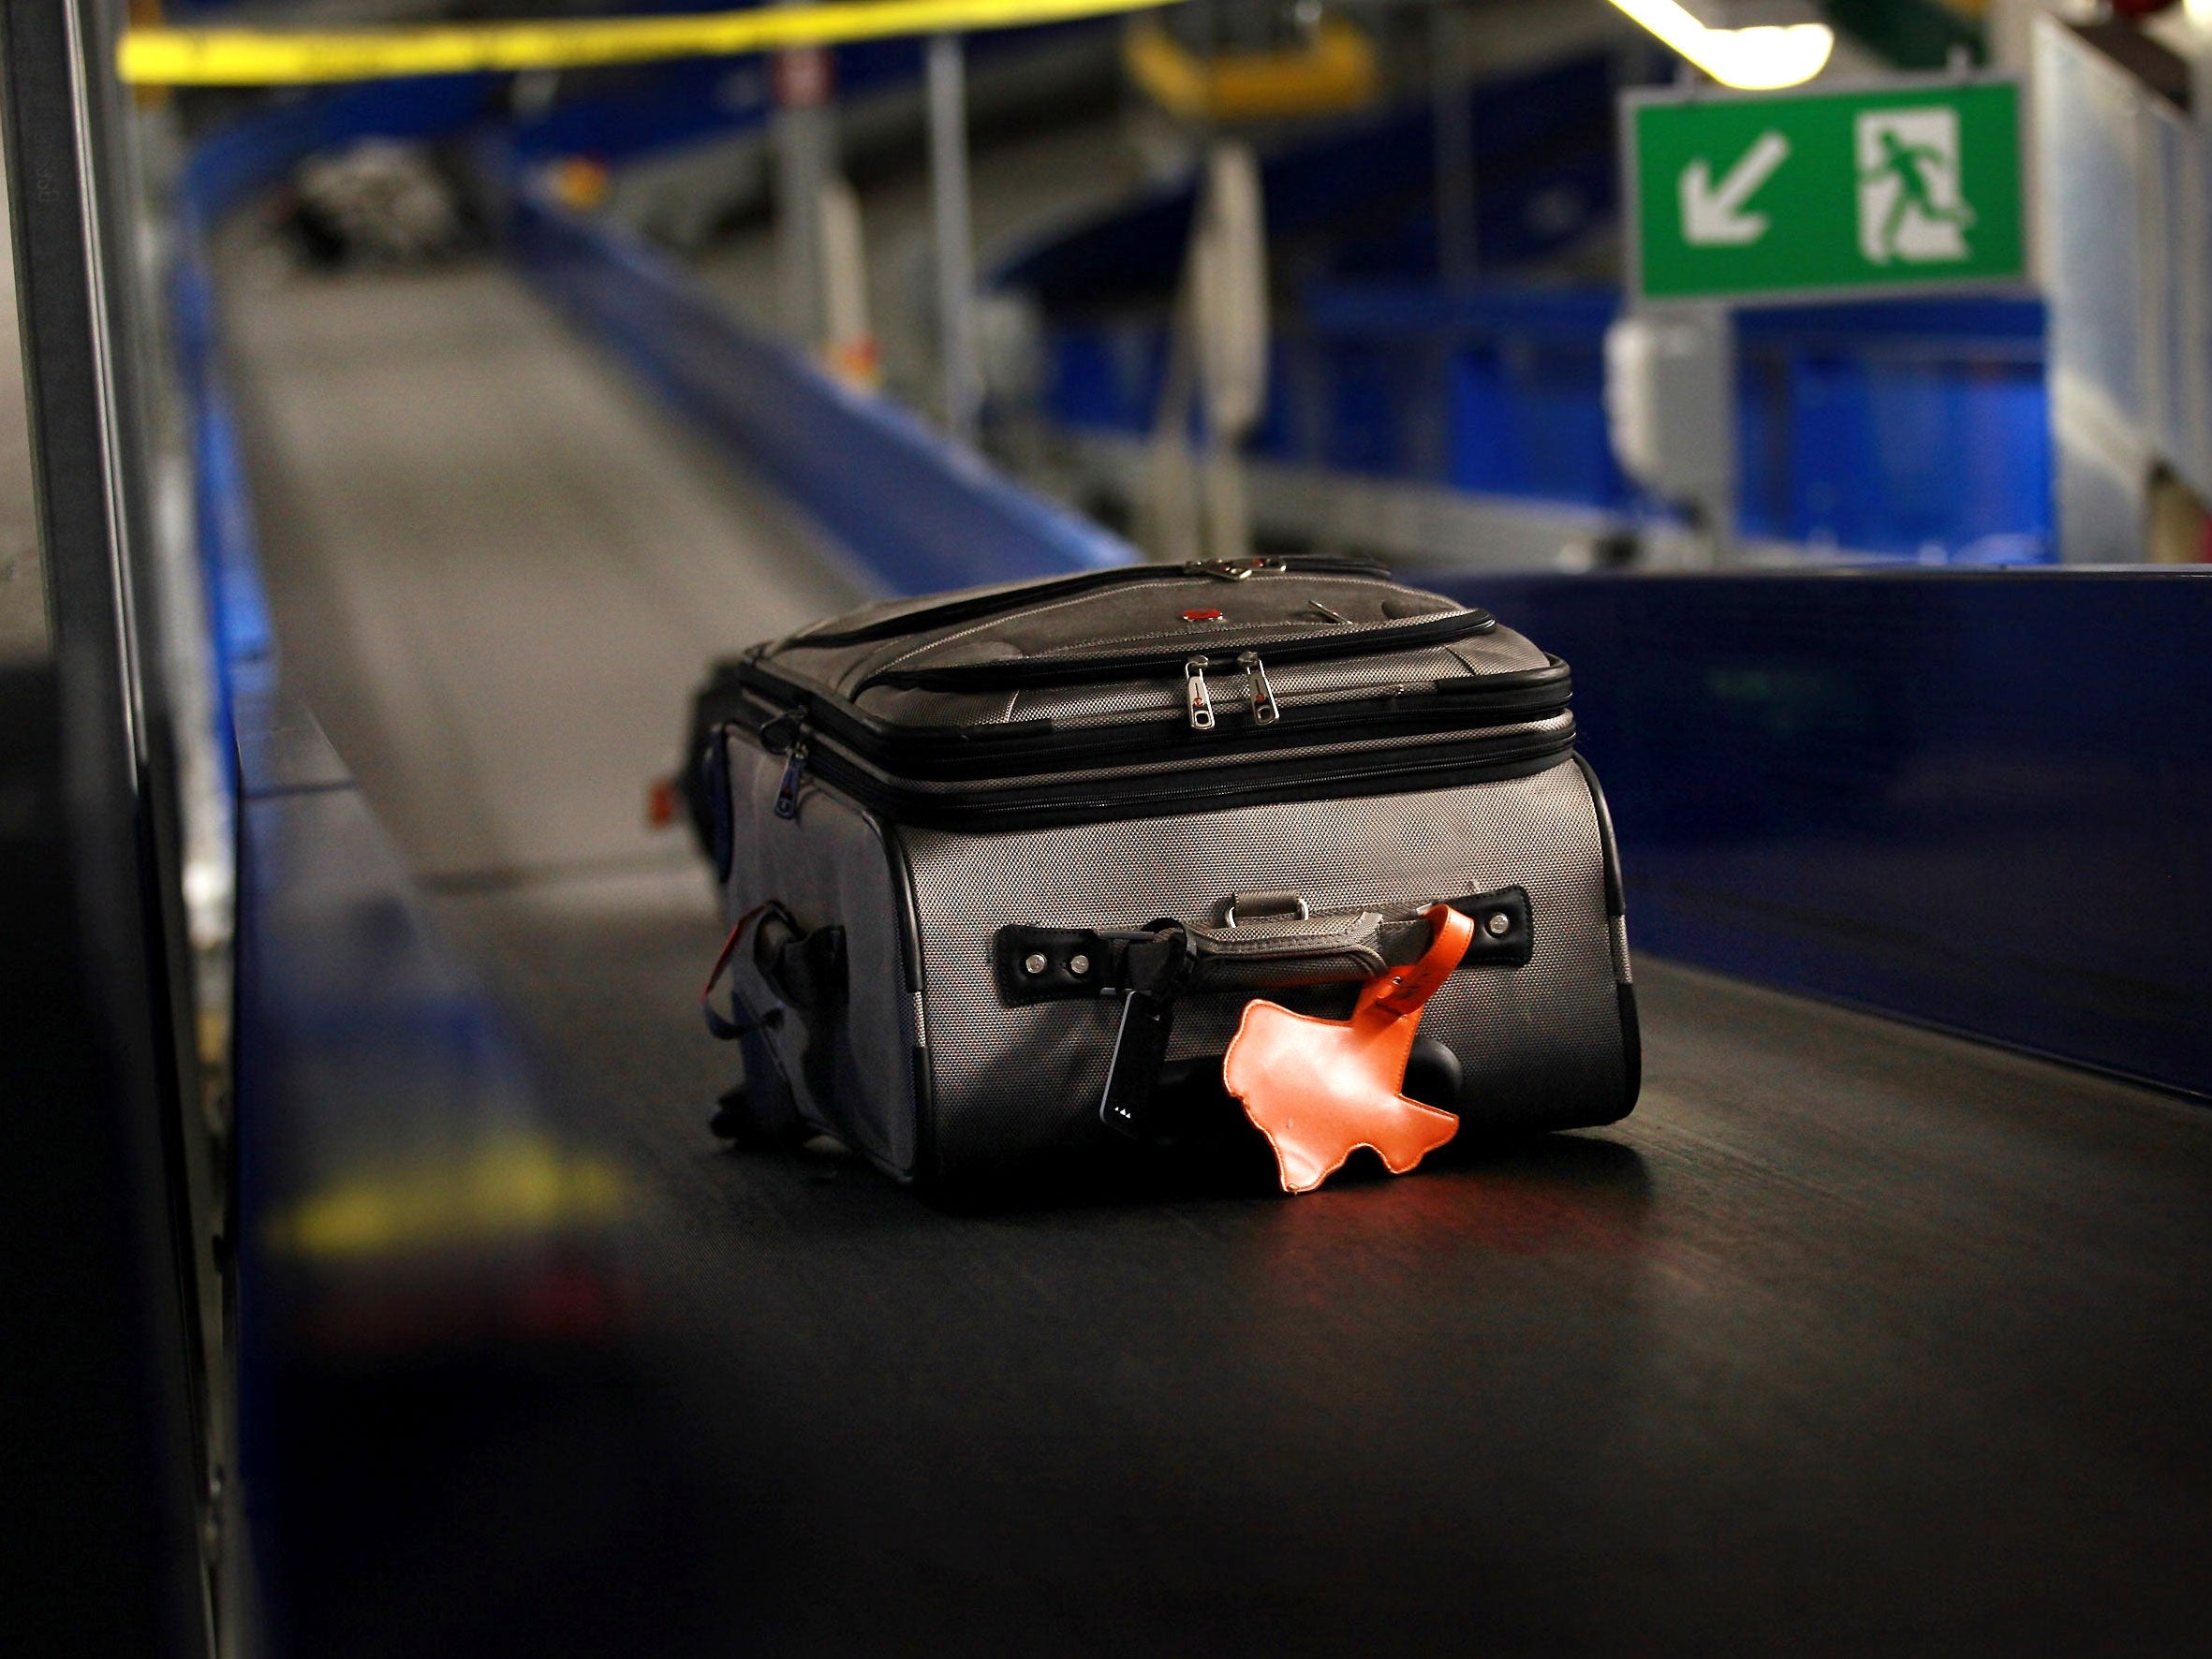 The suitcase disappeared from baggage claim at Malta International Airport